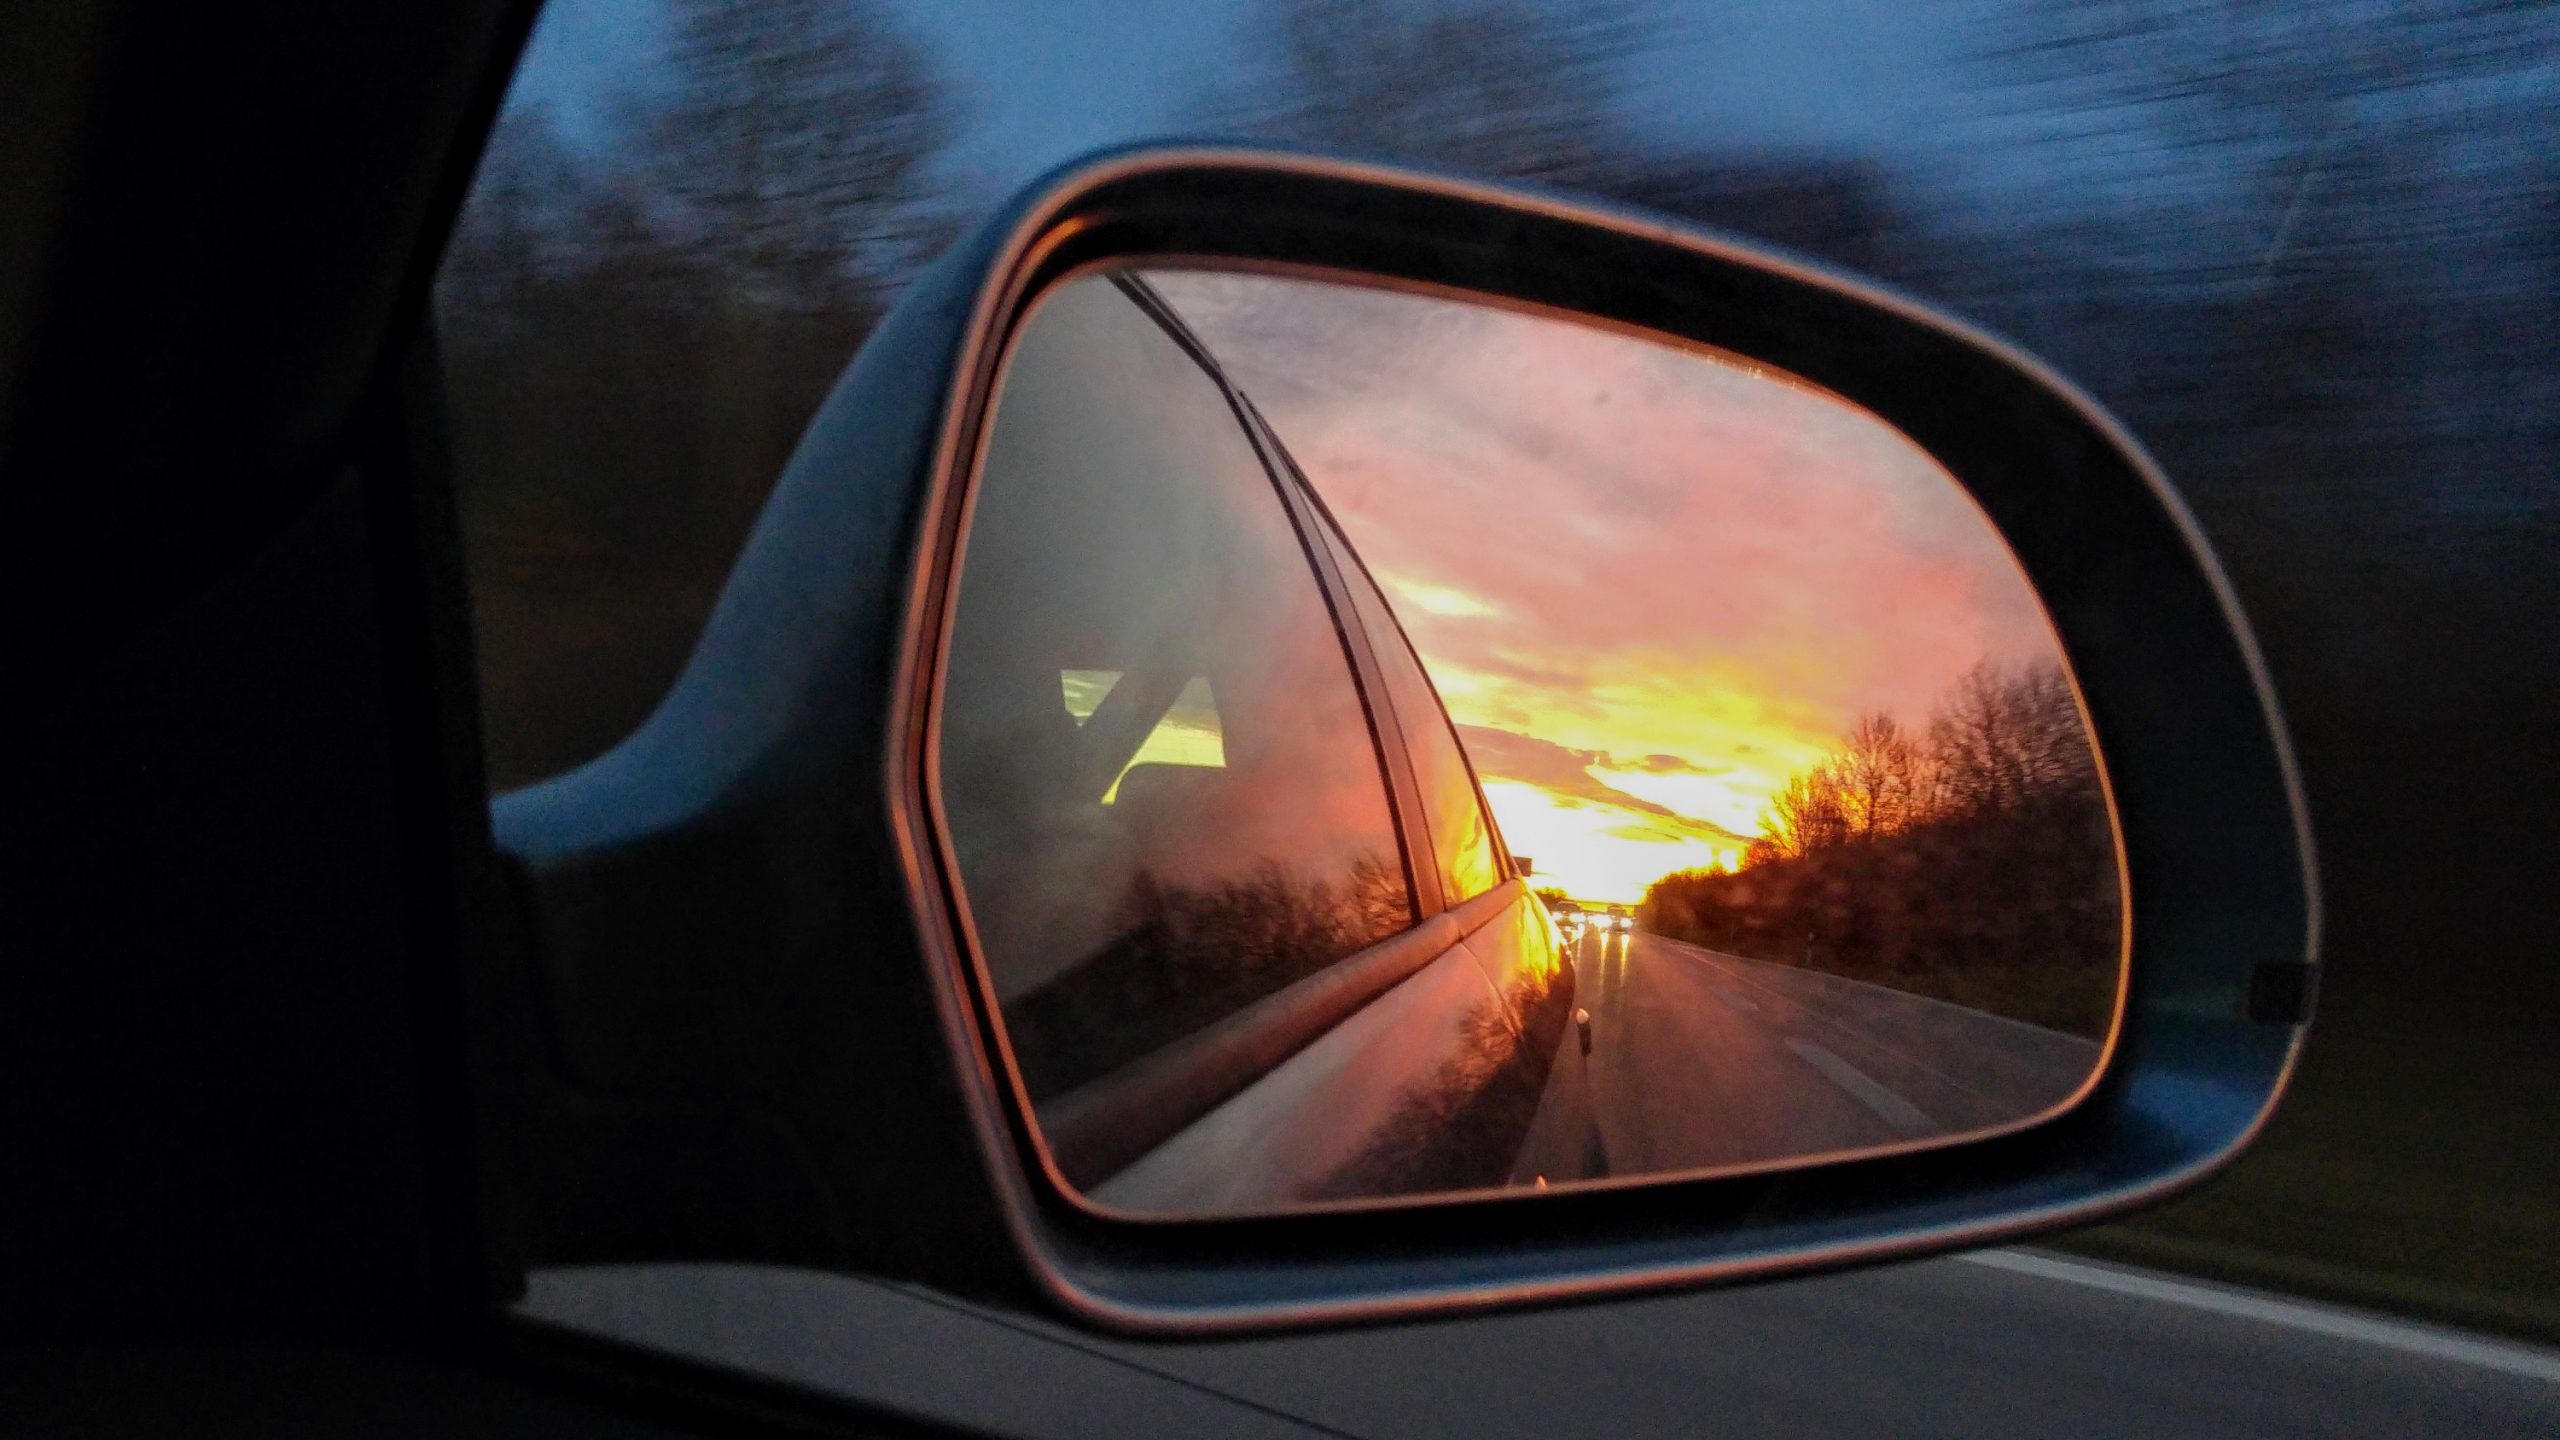 Mirror: Car side-view looking glass, Sunset, Nature, Motion, Reflected scenery. 2560x1440 HD Wallpaper.